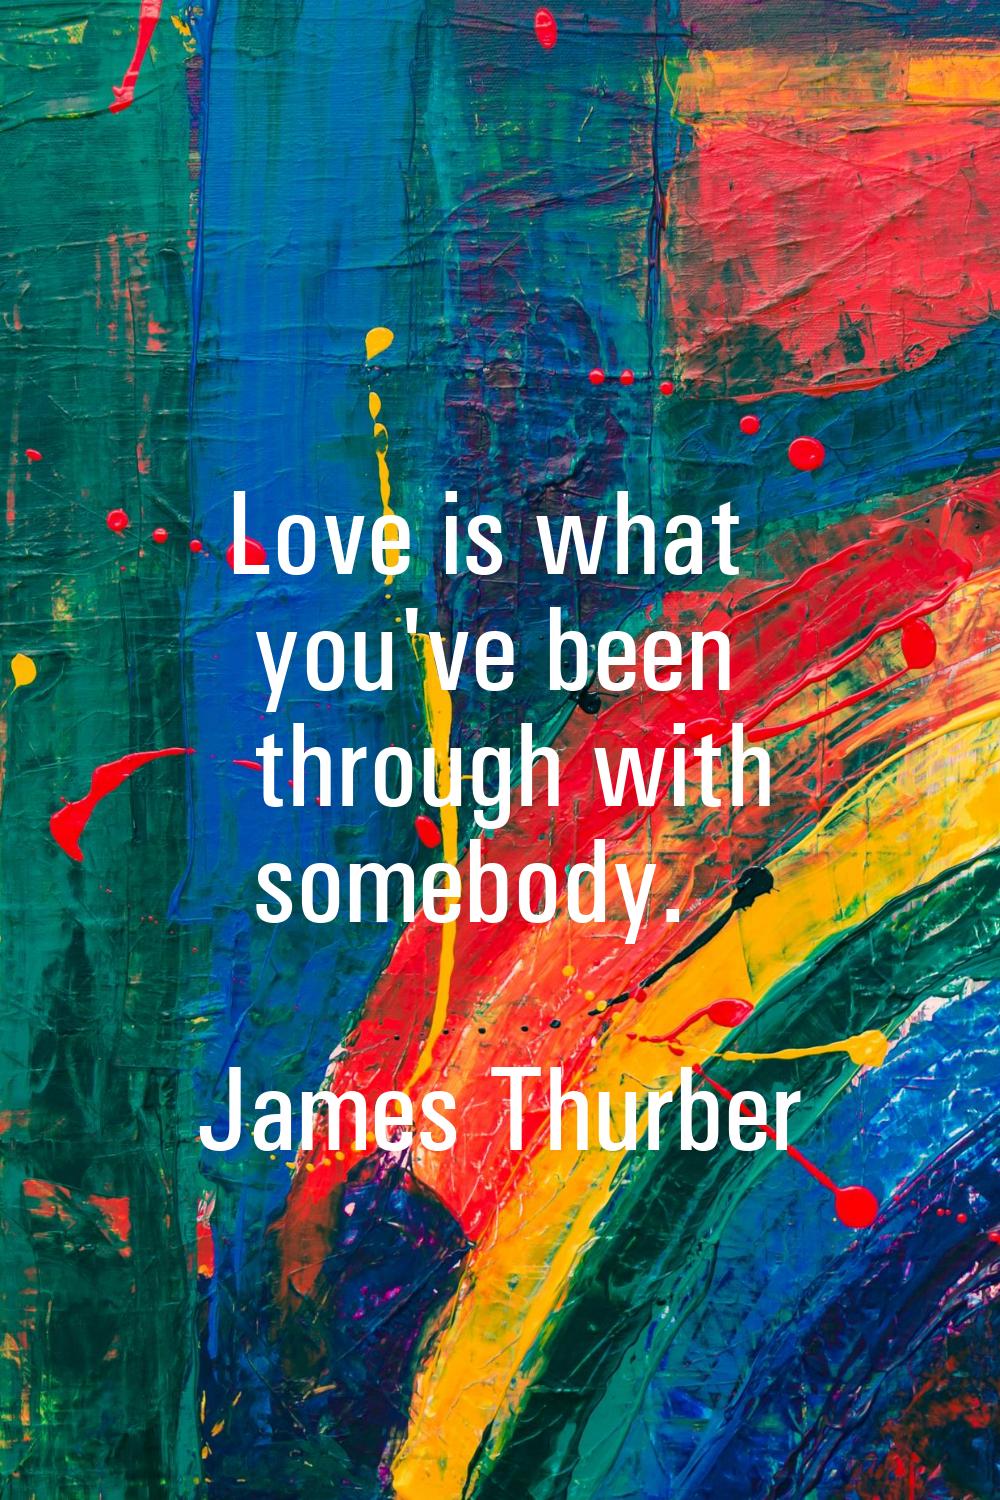 Love is what you've been through with somebody.